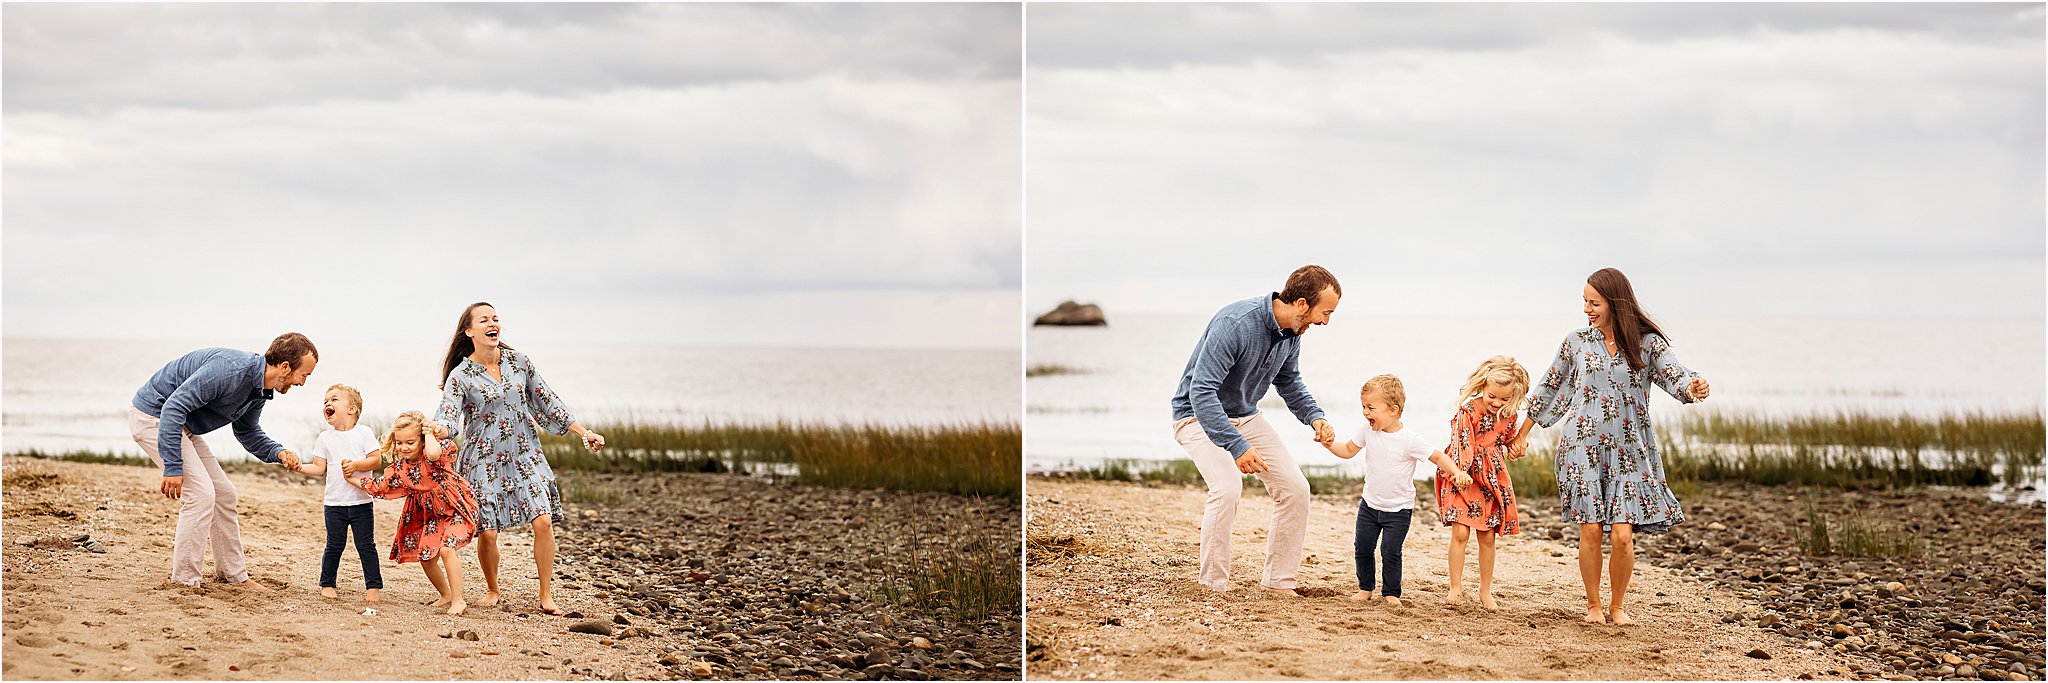 family of four playing together, CT shoreline beautiful family photography session